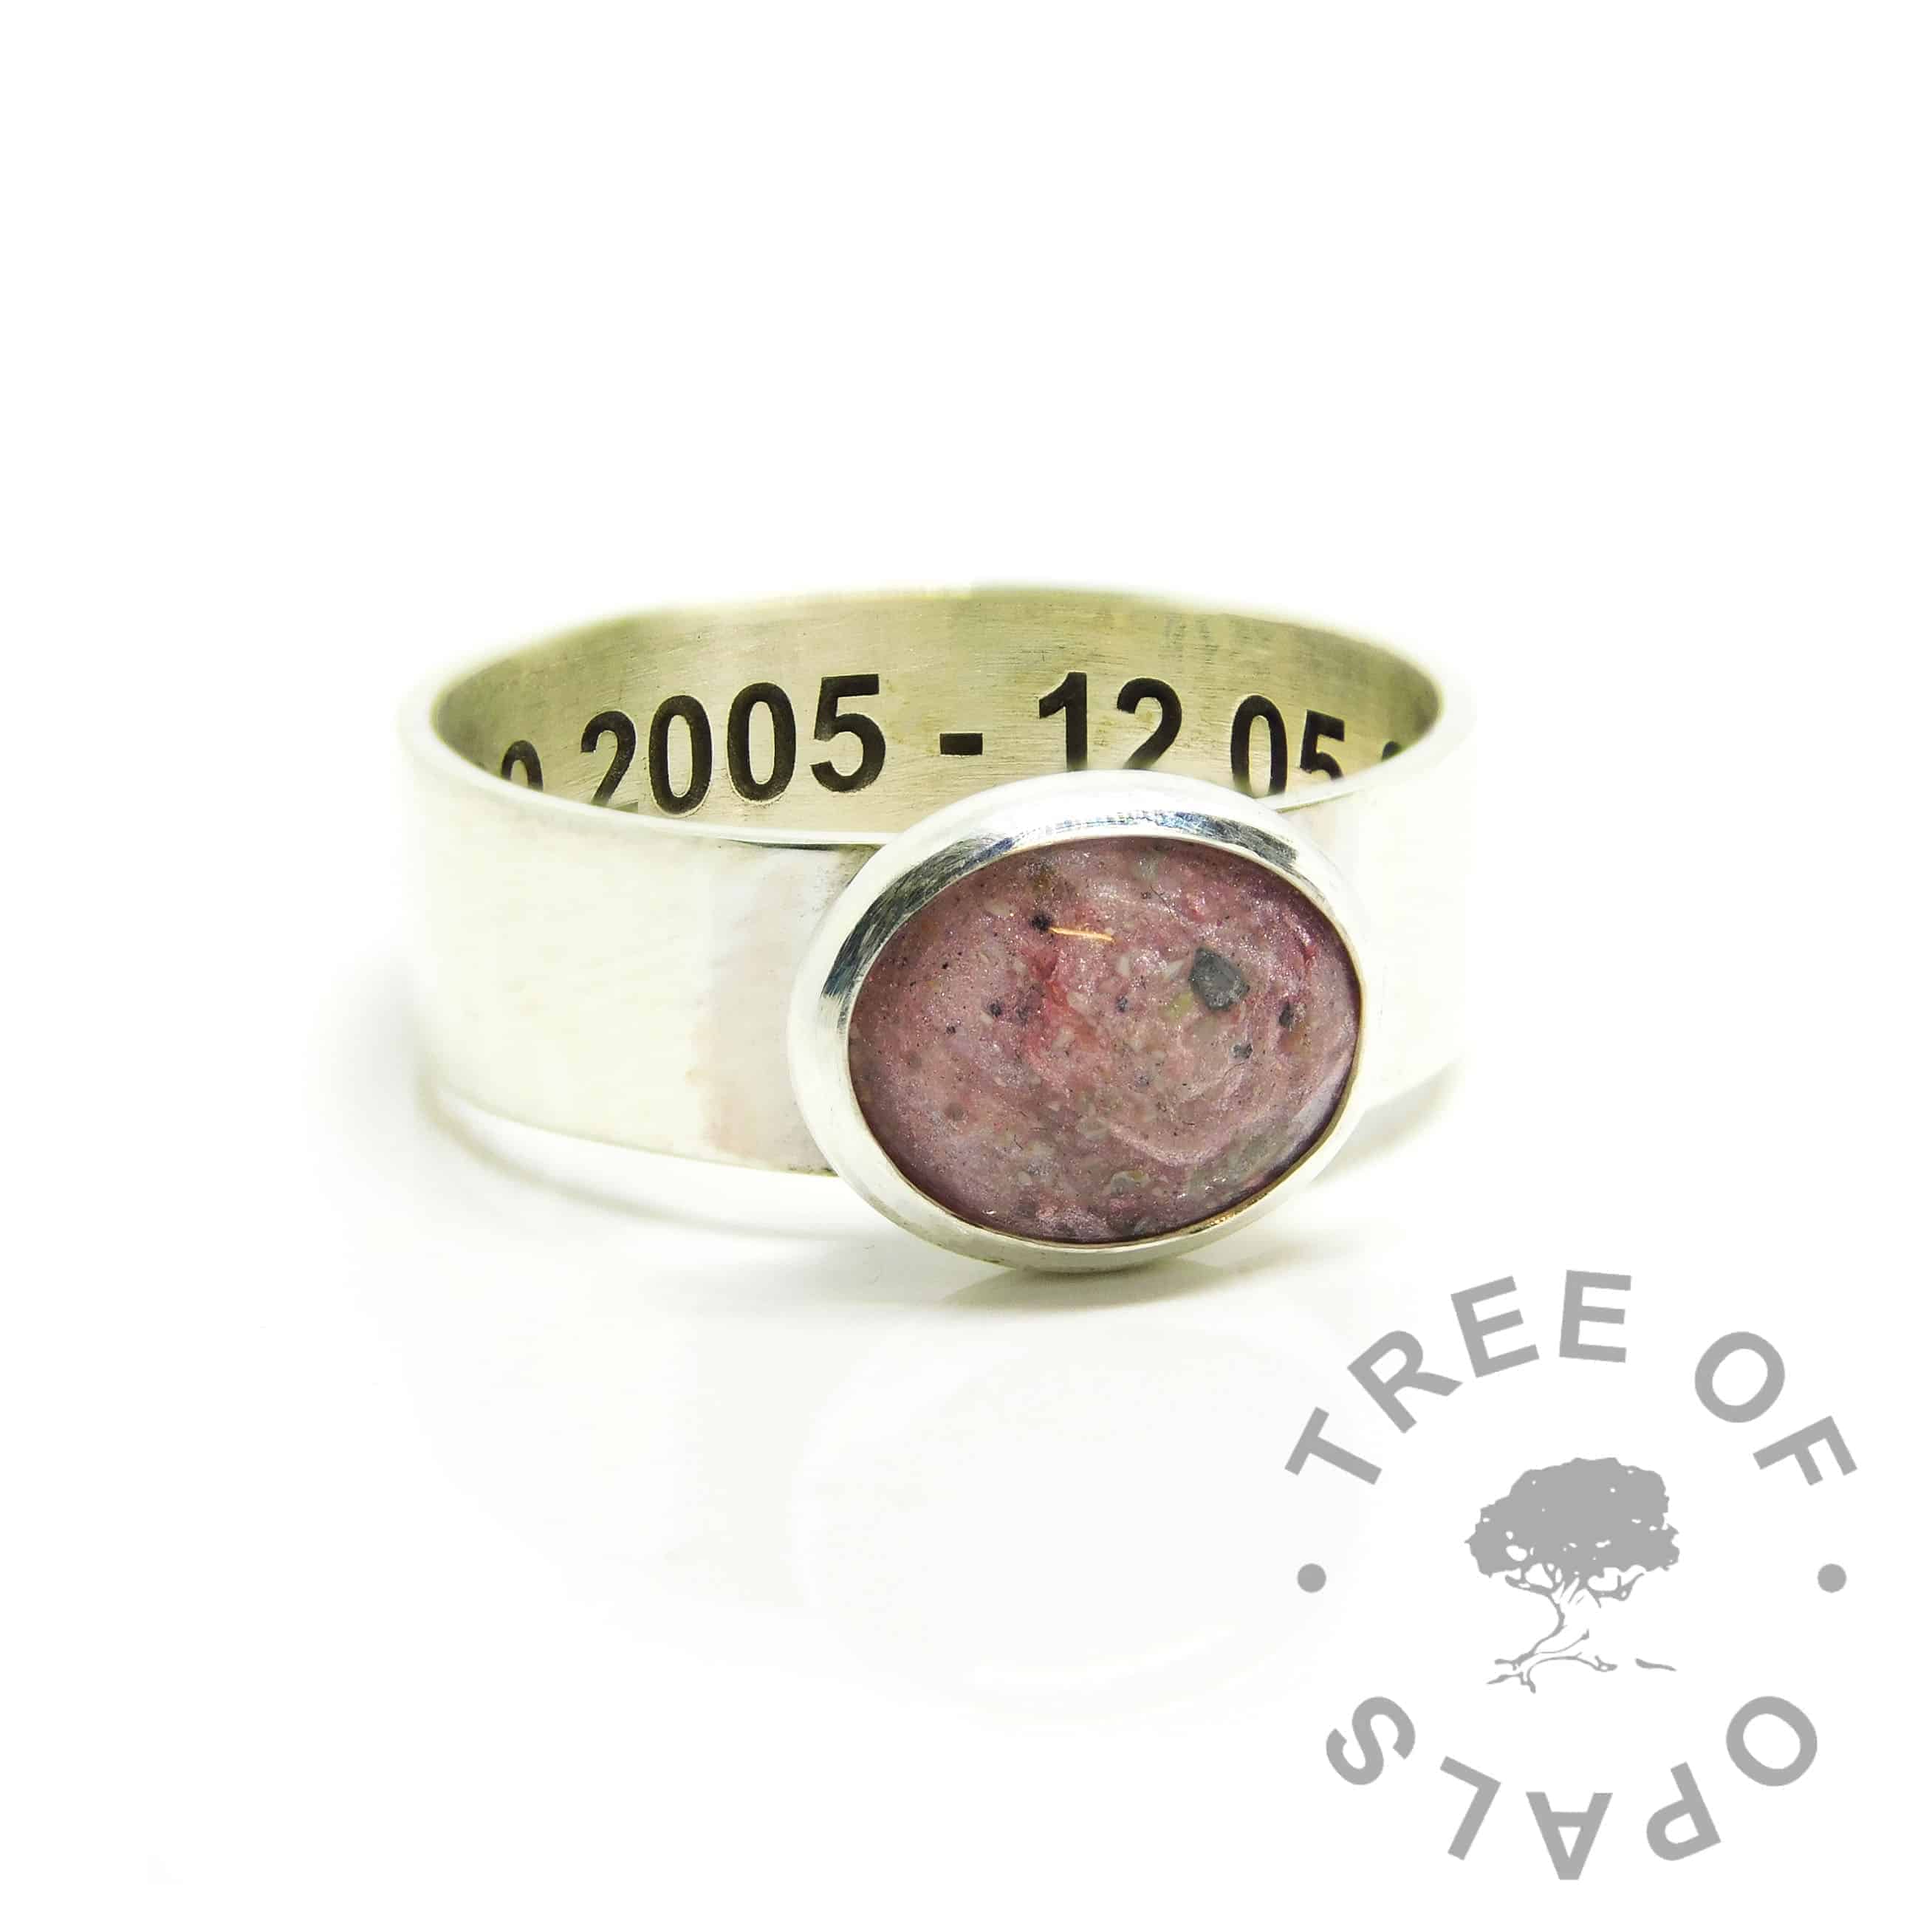 ashes ring pink, fairy pink resin sparkle mix, 6mm shiny band ring setting, engraved inside in arial font